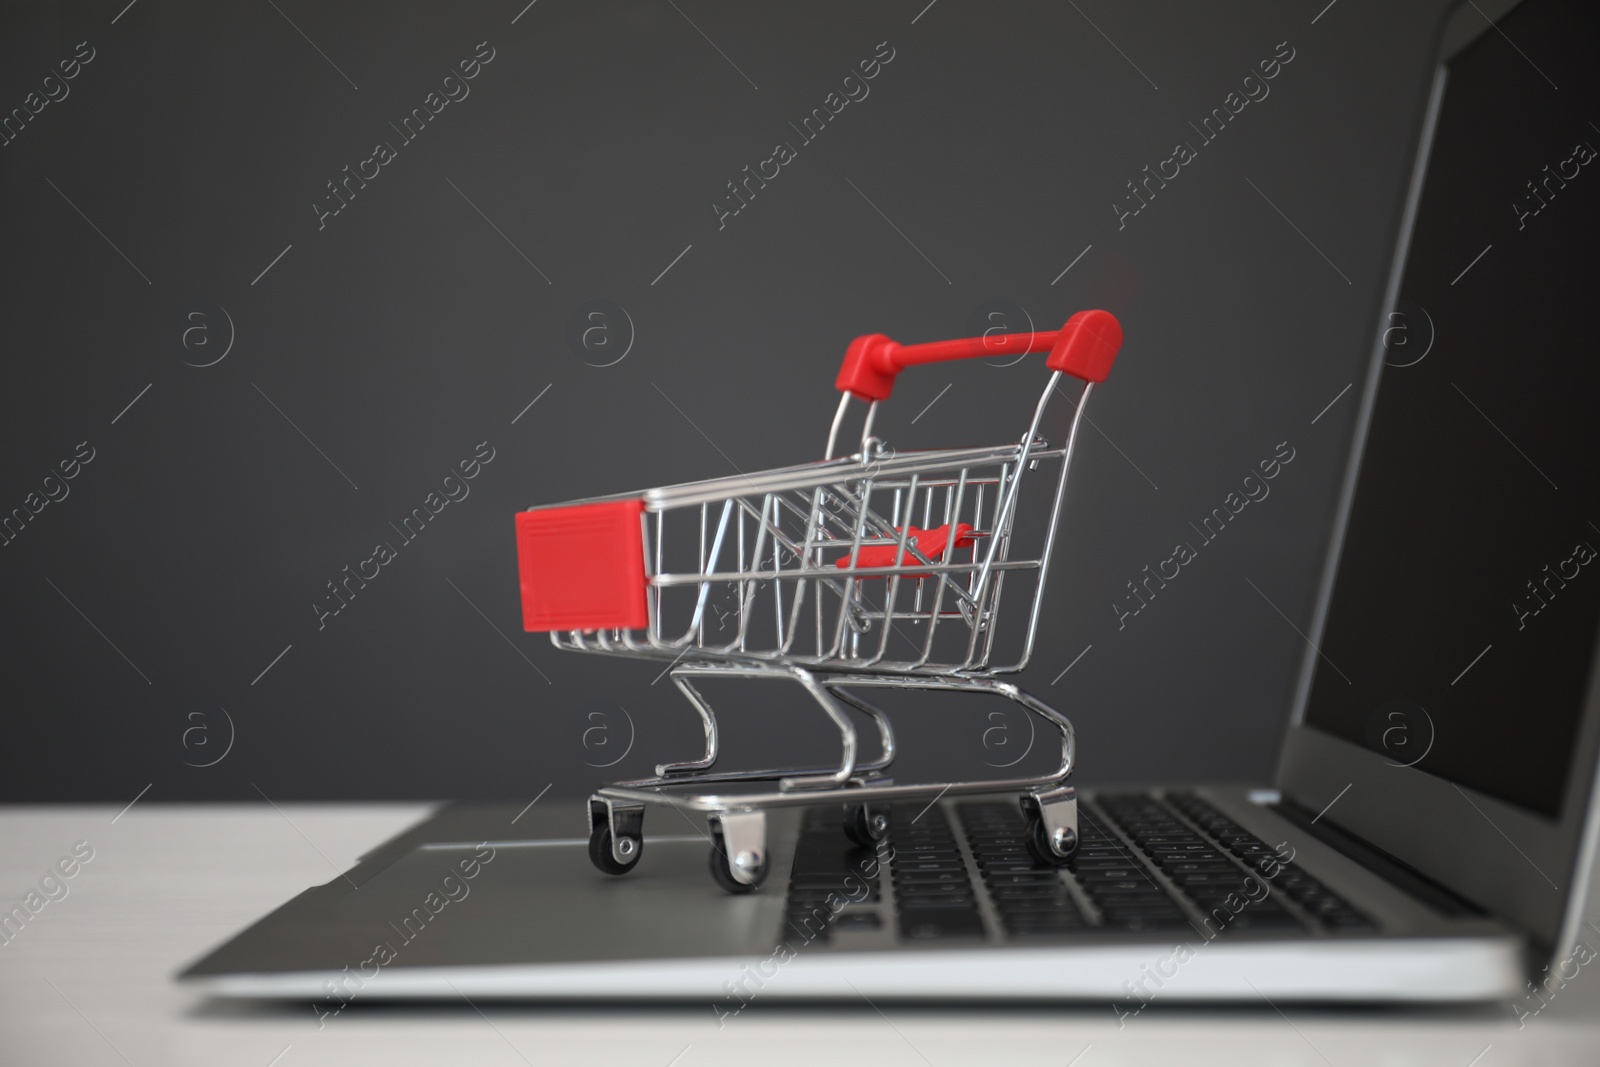 Photo of Internet shopping. Laptop with small cart on table against grey background